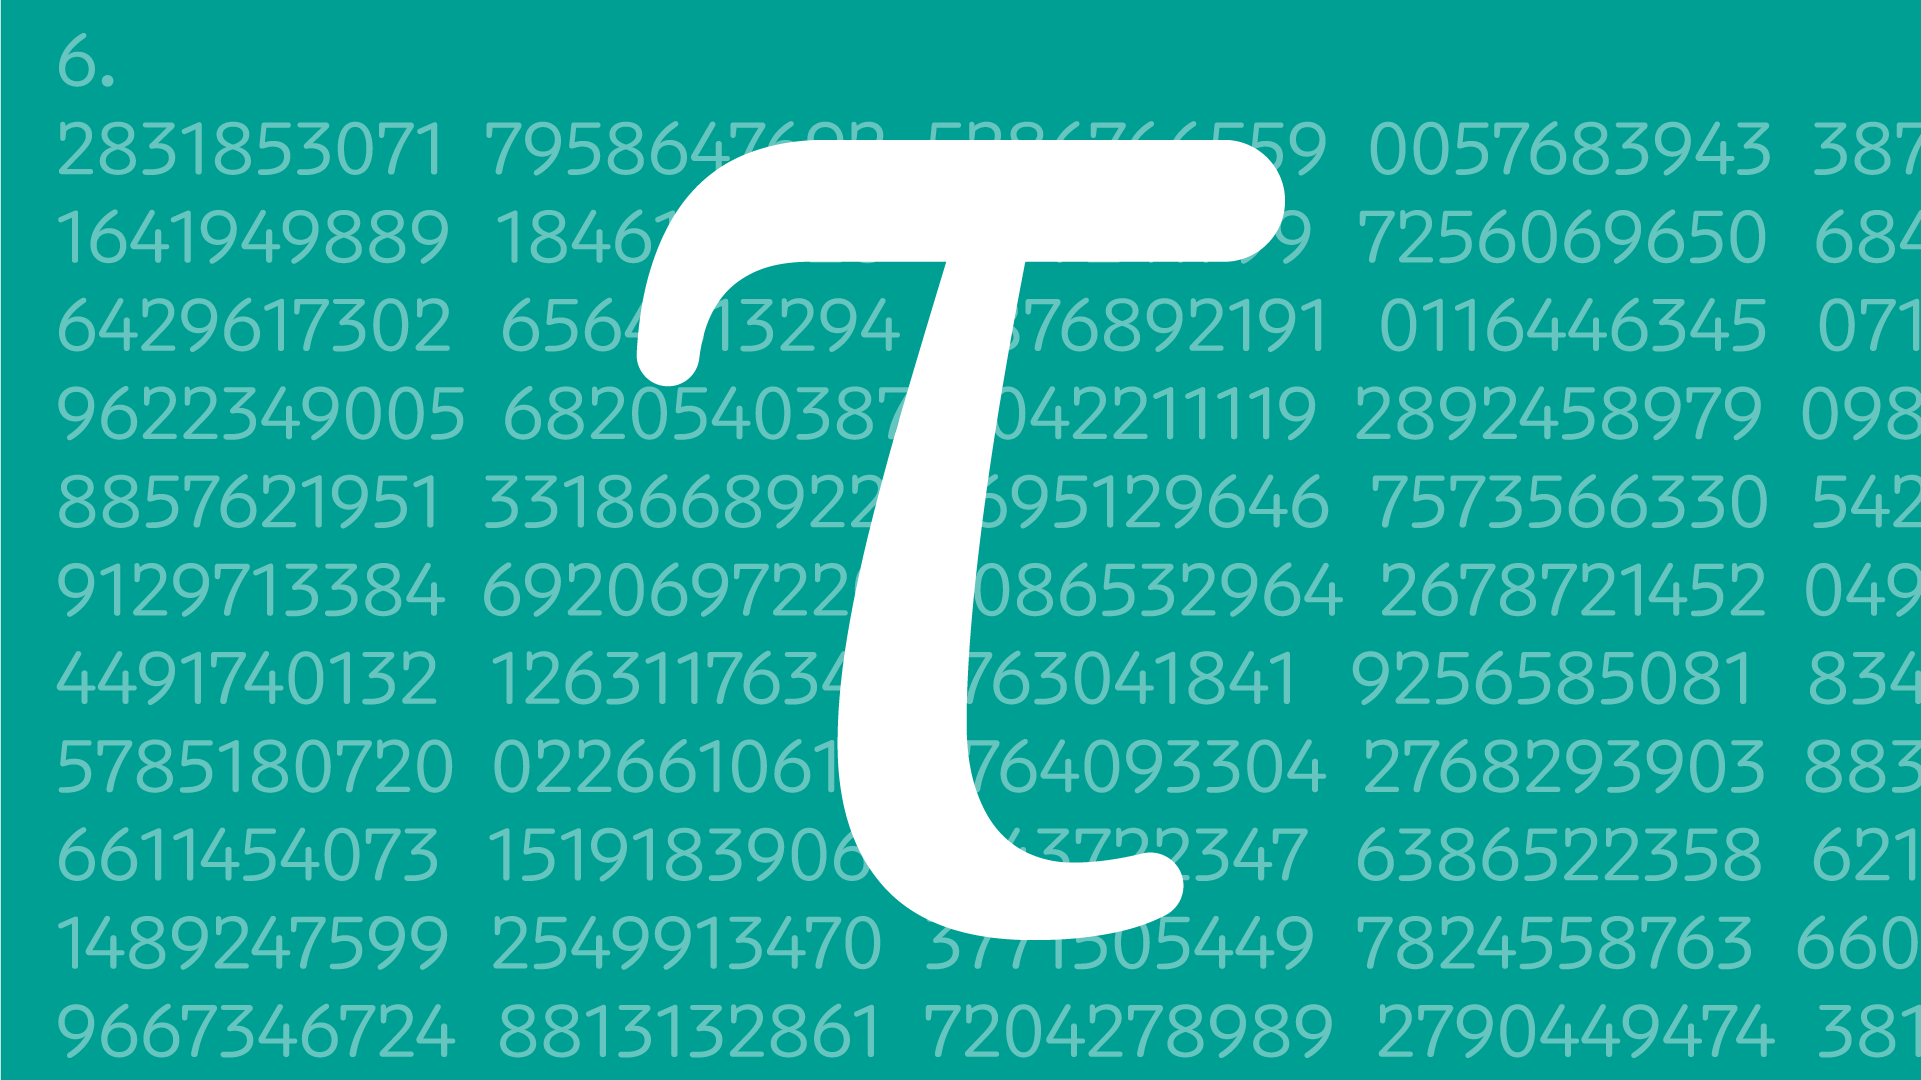 White stylized letter 't' centered on a background of green matrix-style numeric code.